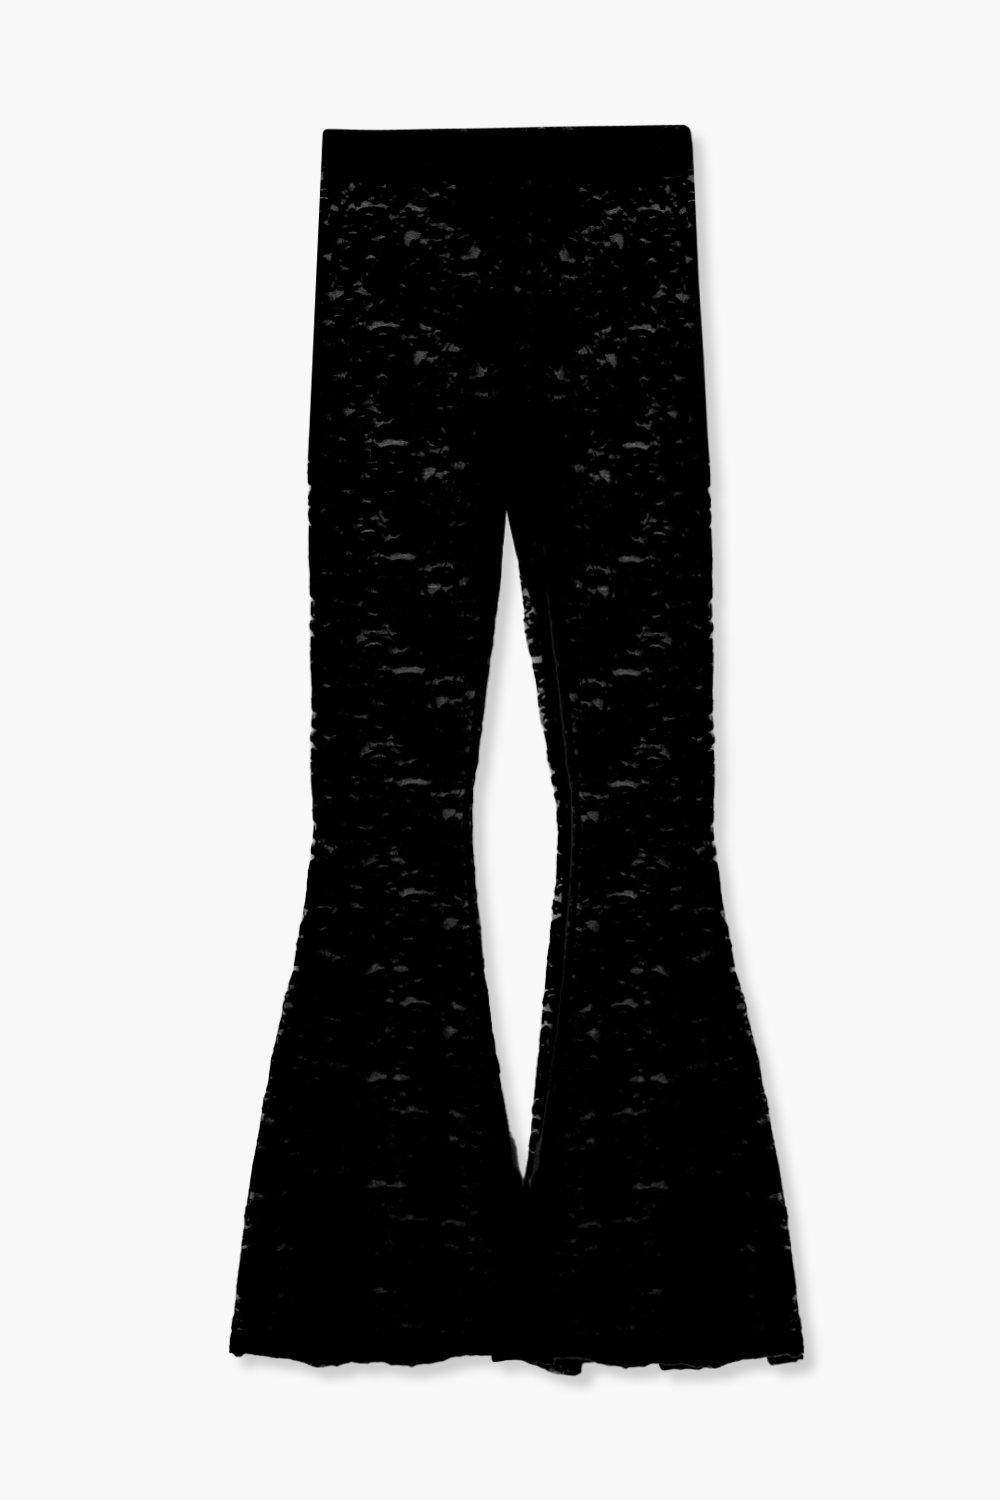 High Waist Flare Pants Leggings for Women Teens Lace-up Color Block Y2k  Gothic Clothes Halloween Bell Bottoms (Medium, Dark Gray) 